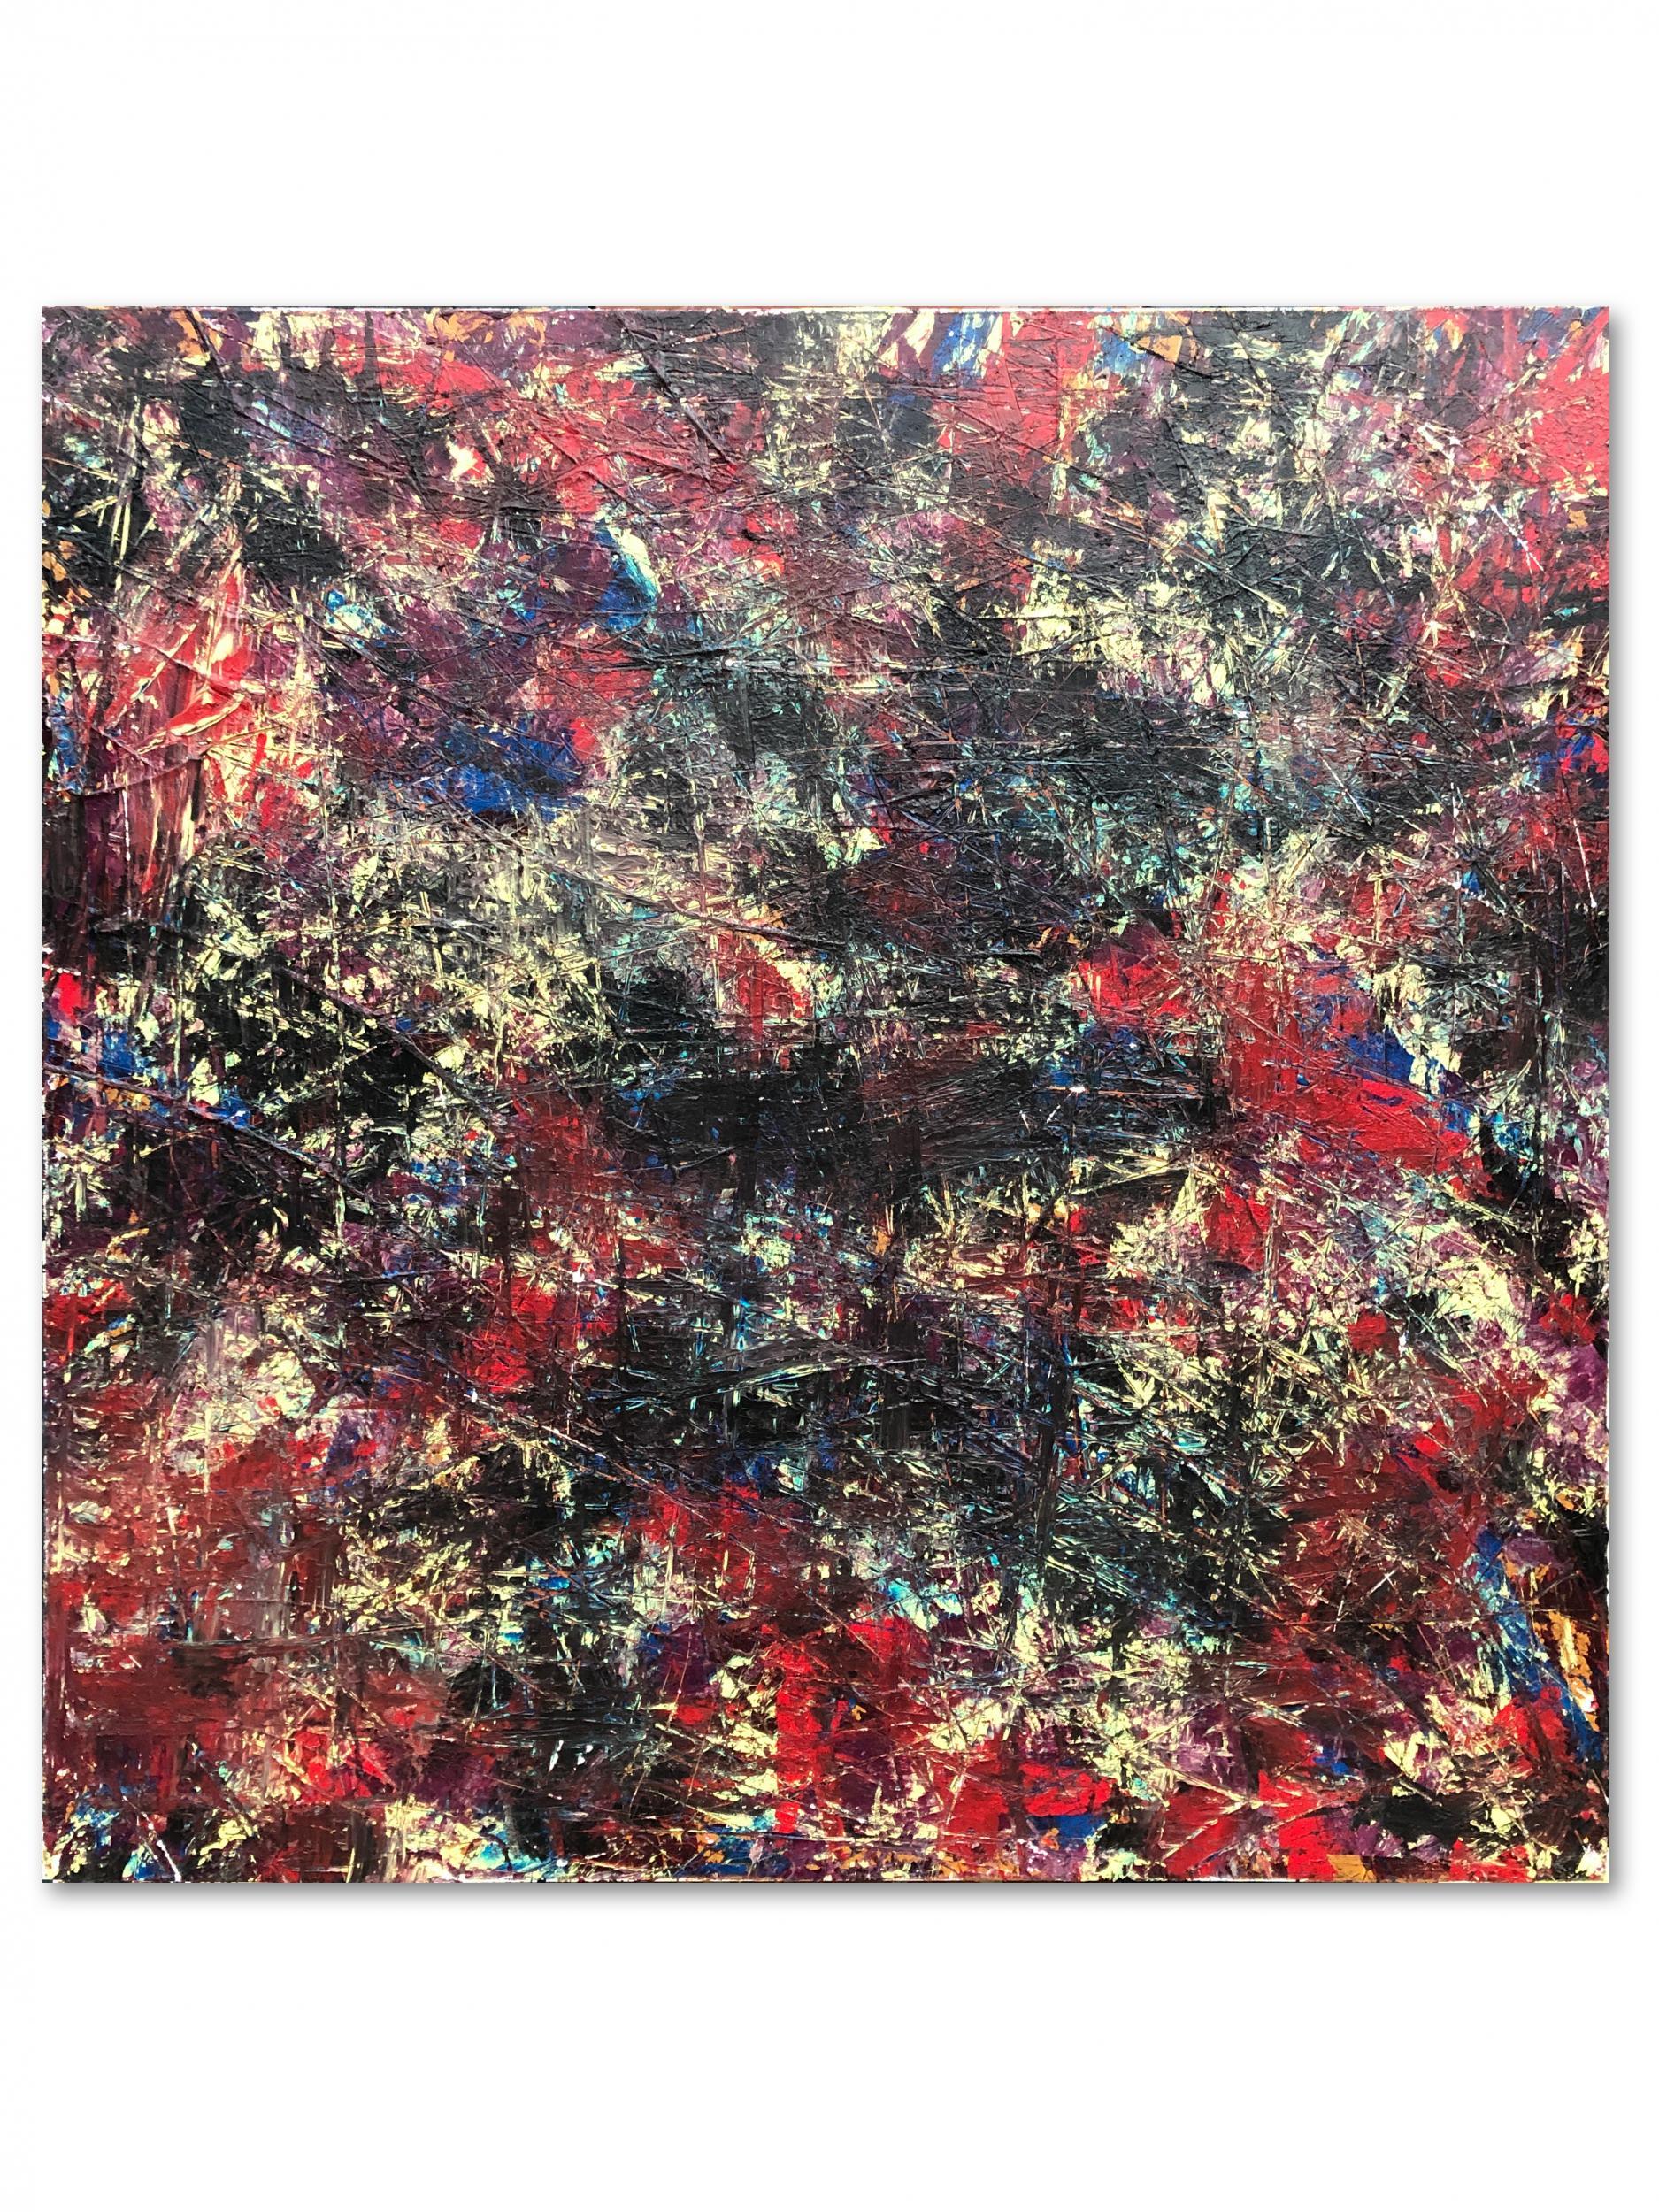 Title, Red Noise.

The painting is signed by the artist on the back and comes with a small brass plaque with the artist's name.

Comes with a “Certificate of Authenticity” from the artist.